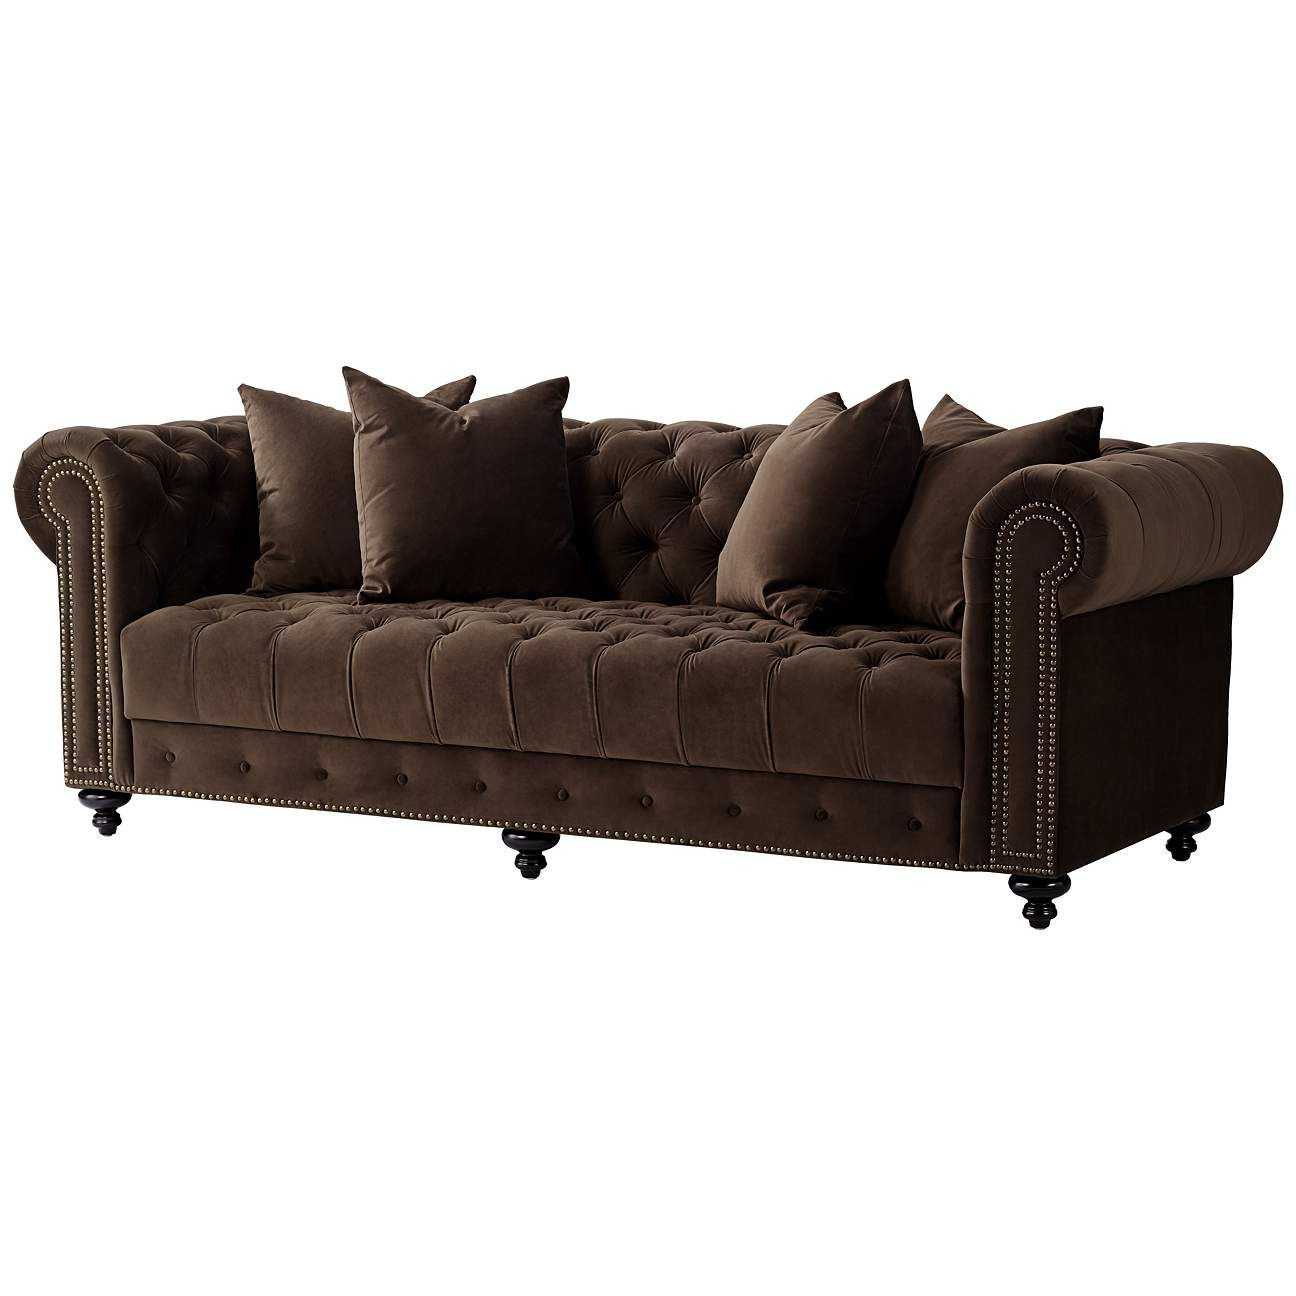 Well Known Jules 90"w Chocolate Brown Velvet Tufted Chesterfield Sofa – #58j03 Inside Sofas In Chocolate Brown (View 2 of 15)